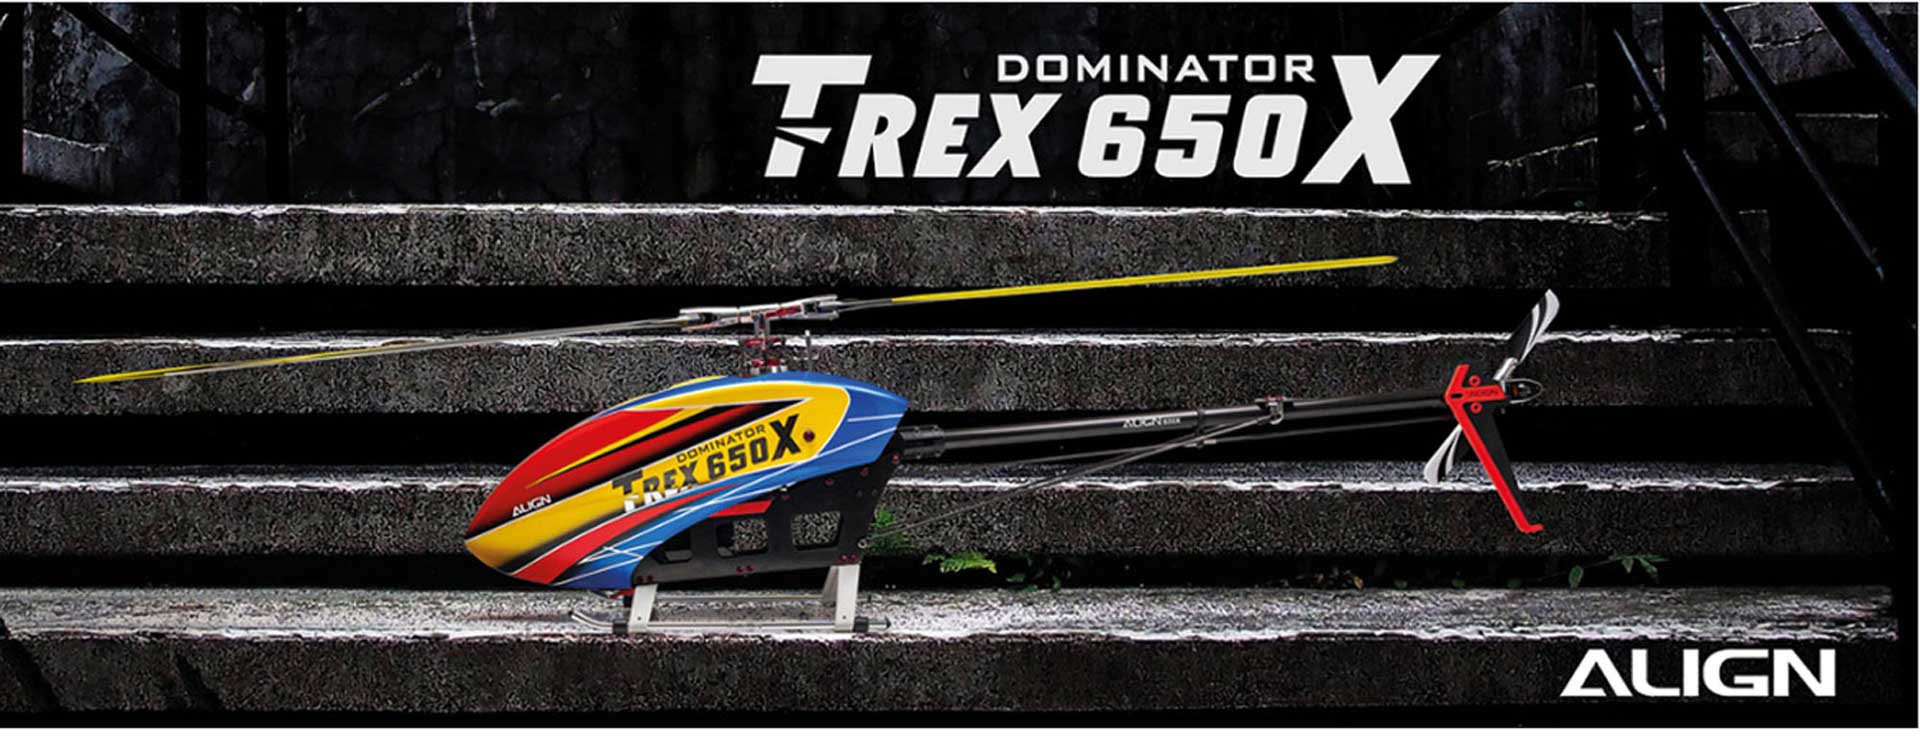 ALIGN T-REX 650X Dominator Combo (12S) RC Helicopter